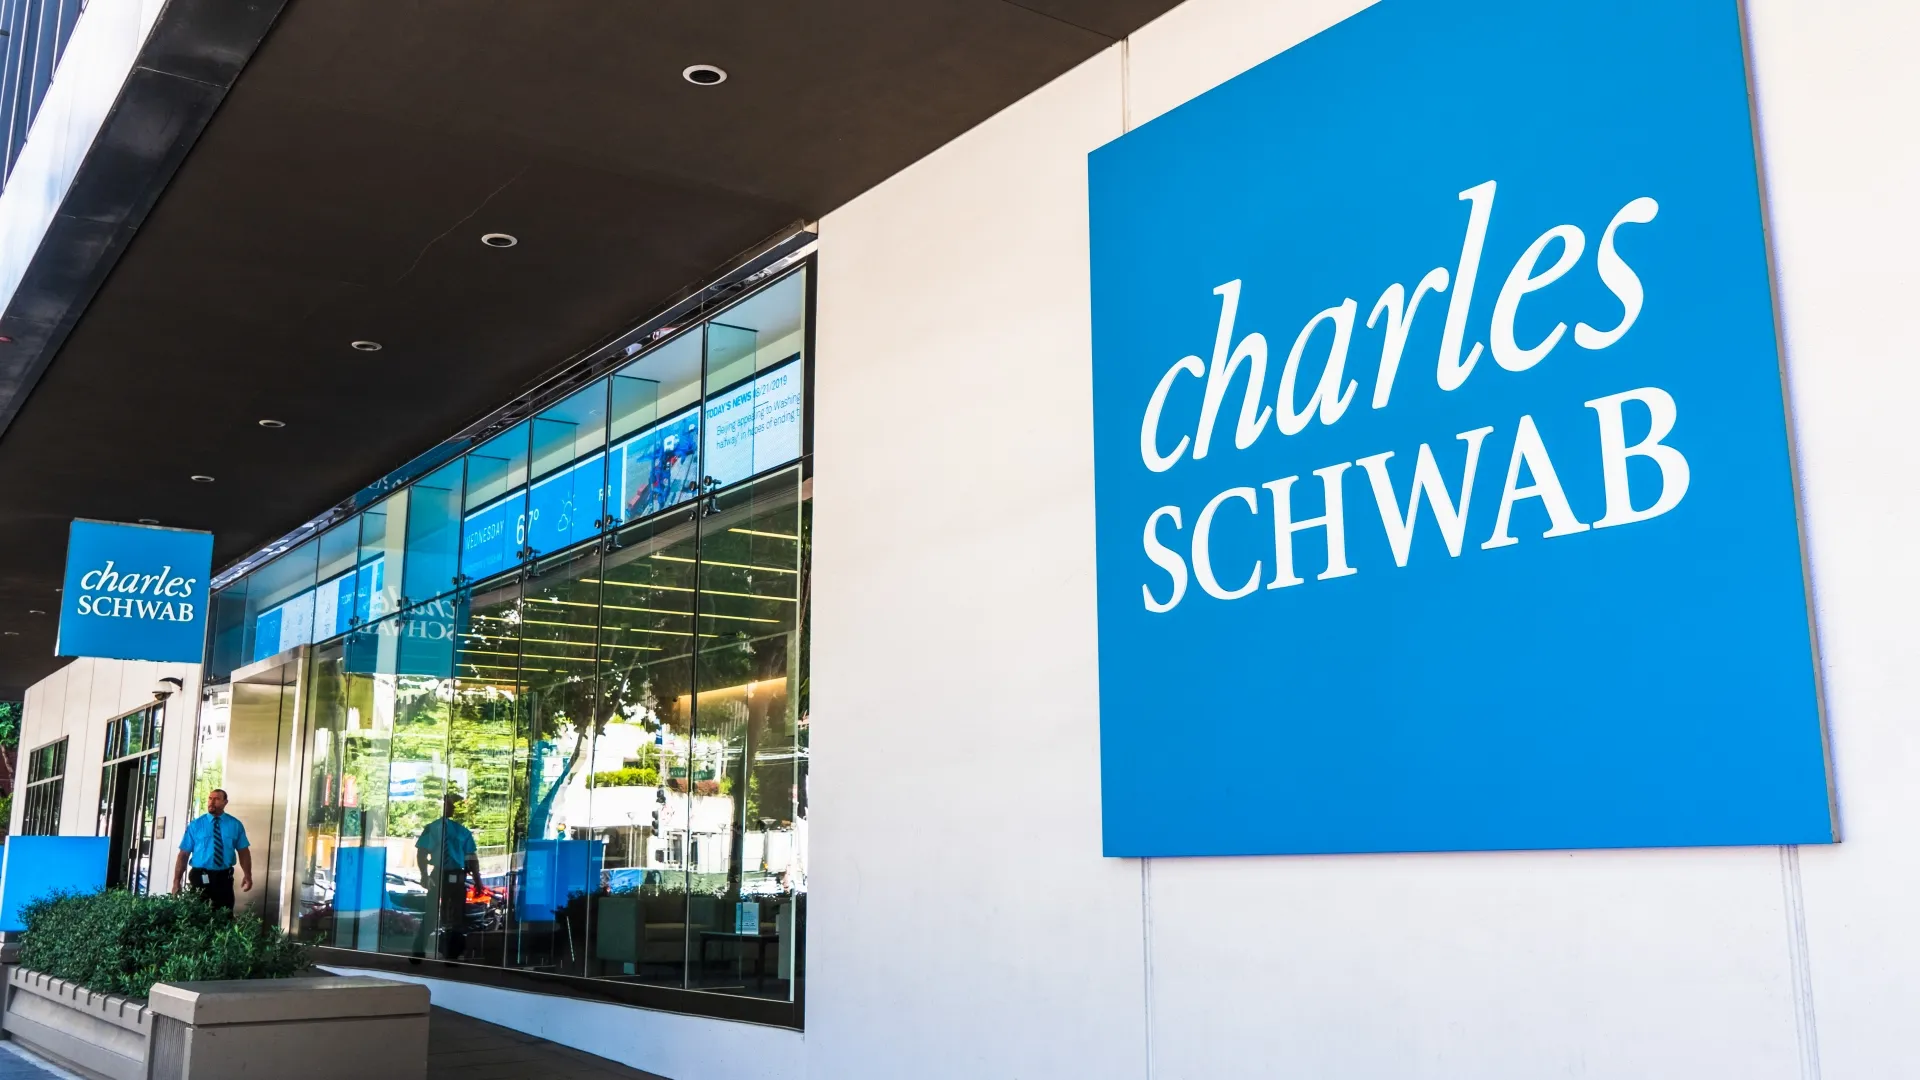 August 21, 2019 San Francisco / CA / USA - Charles Schwab office building in SOMA district; The Charles Schwab Corporation is a bank and stock brokerage firm.